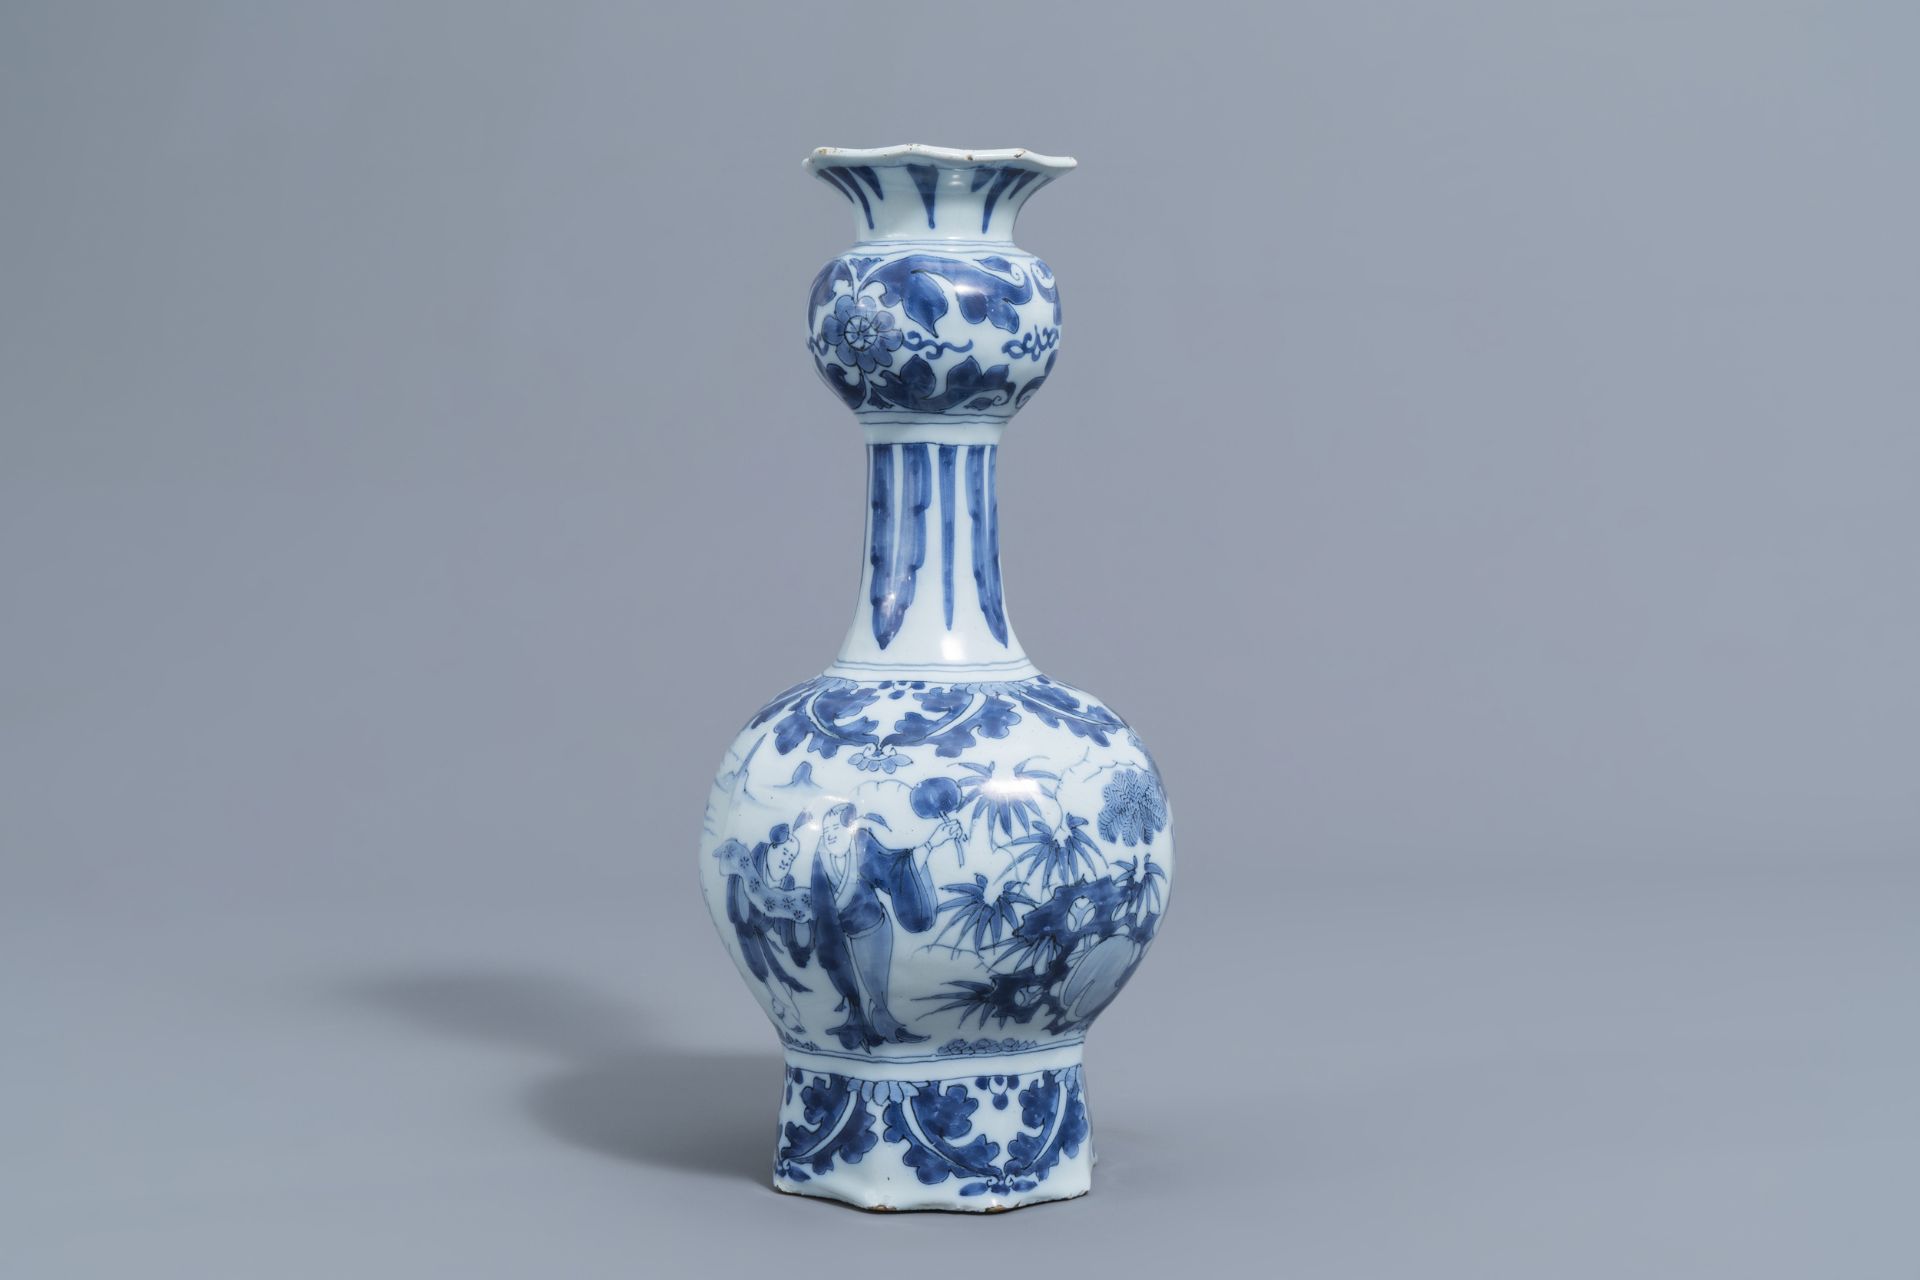 A Dutch Delft blue and white 'chinoiserie' garlic neck bottle vase, late 17th C. - Image 3 of 6